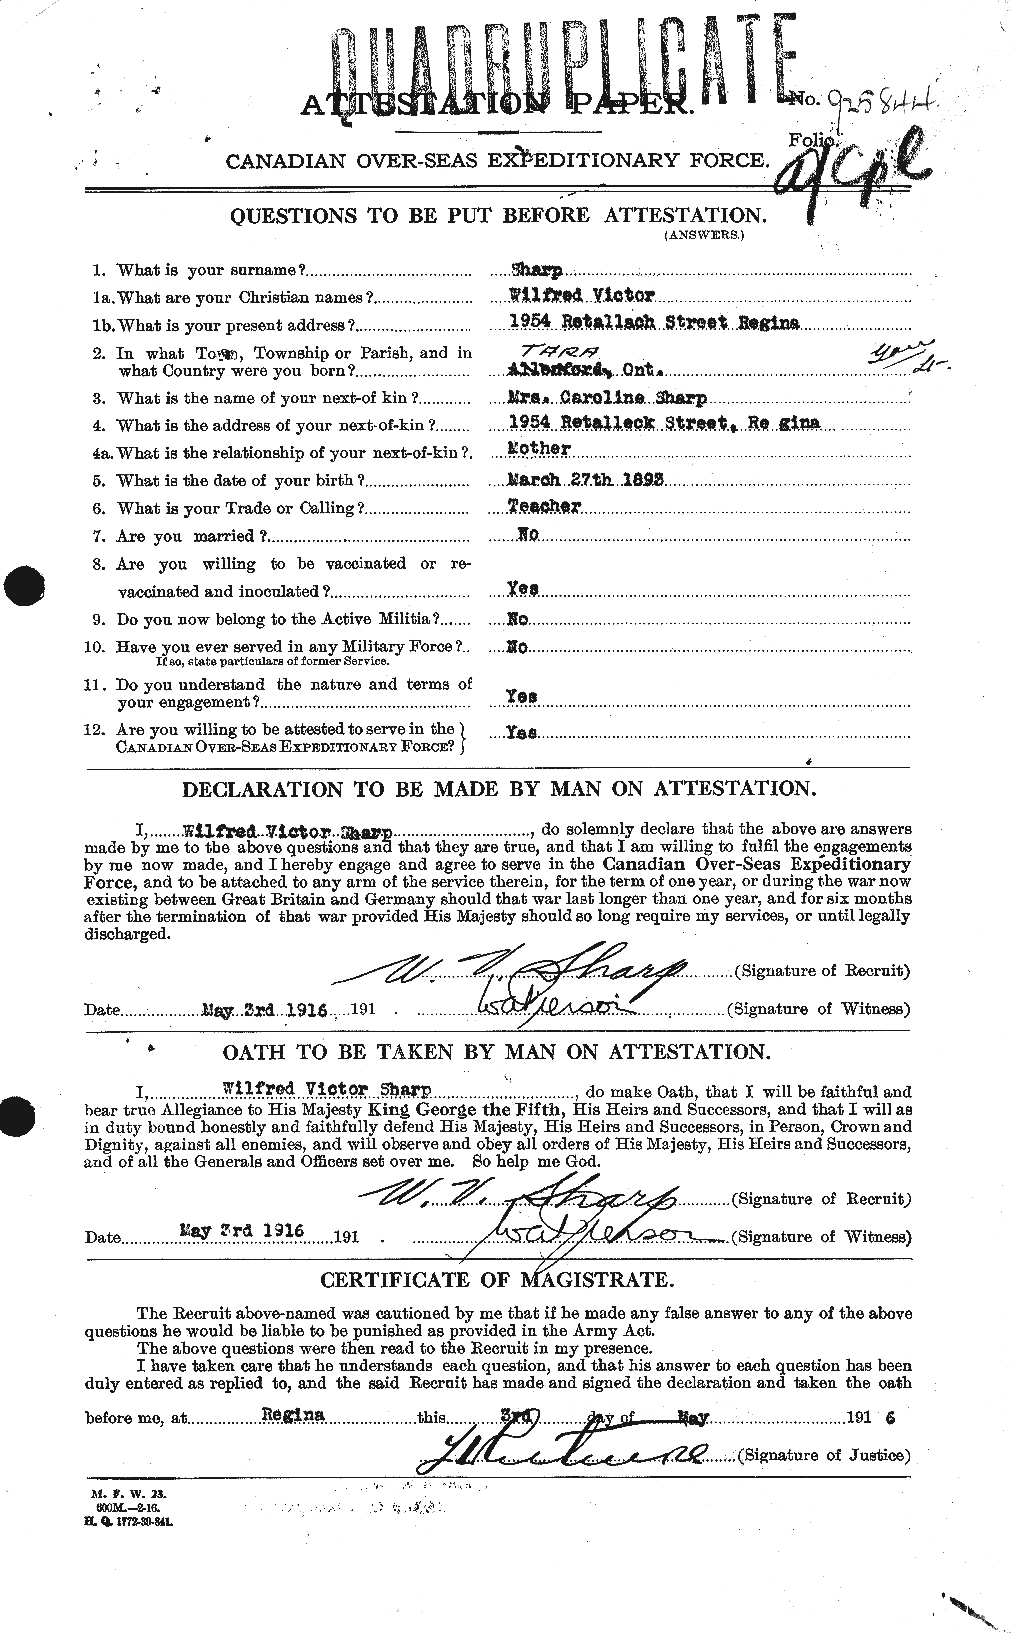 Personnel Records of the First World War - CEF 091838a